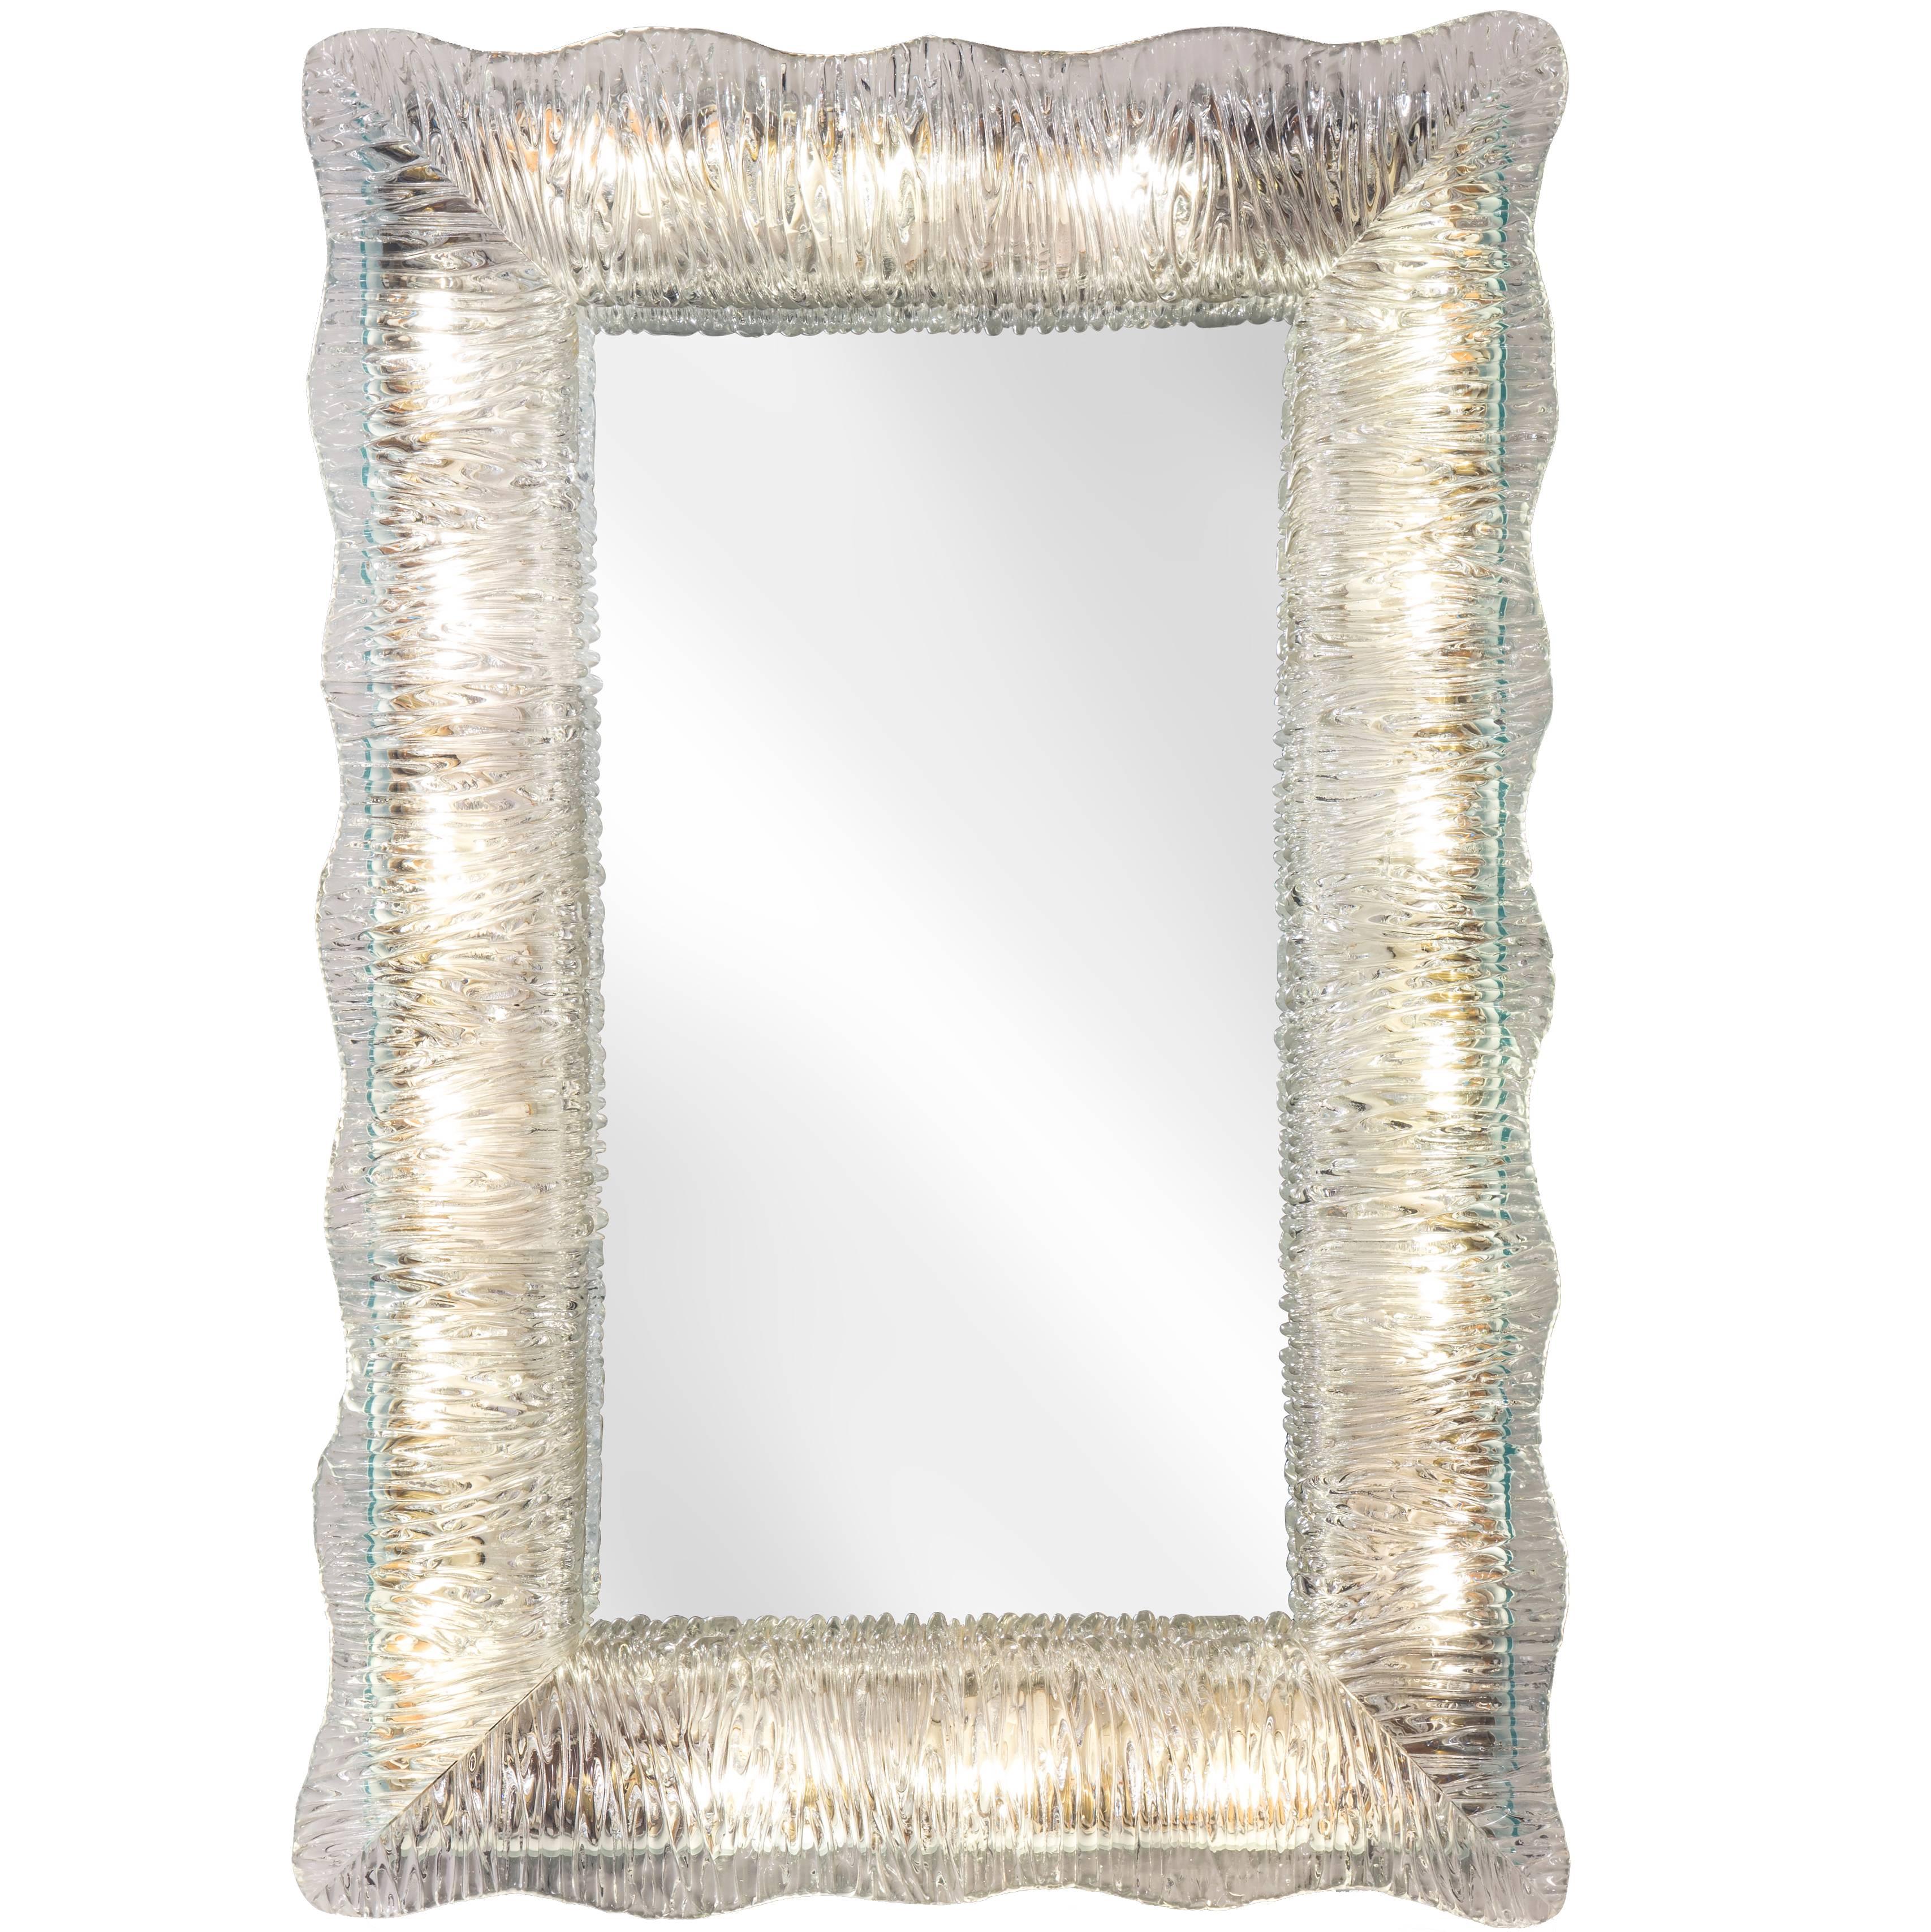 Venini, Rare Illuminated Textured and Colorless Murano Glass Framed Mirror For Sale